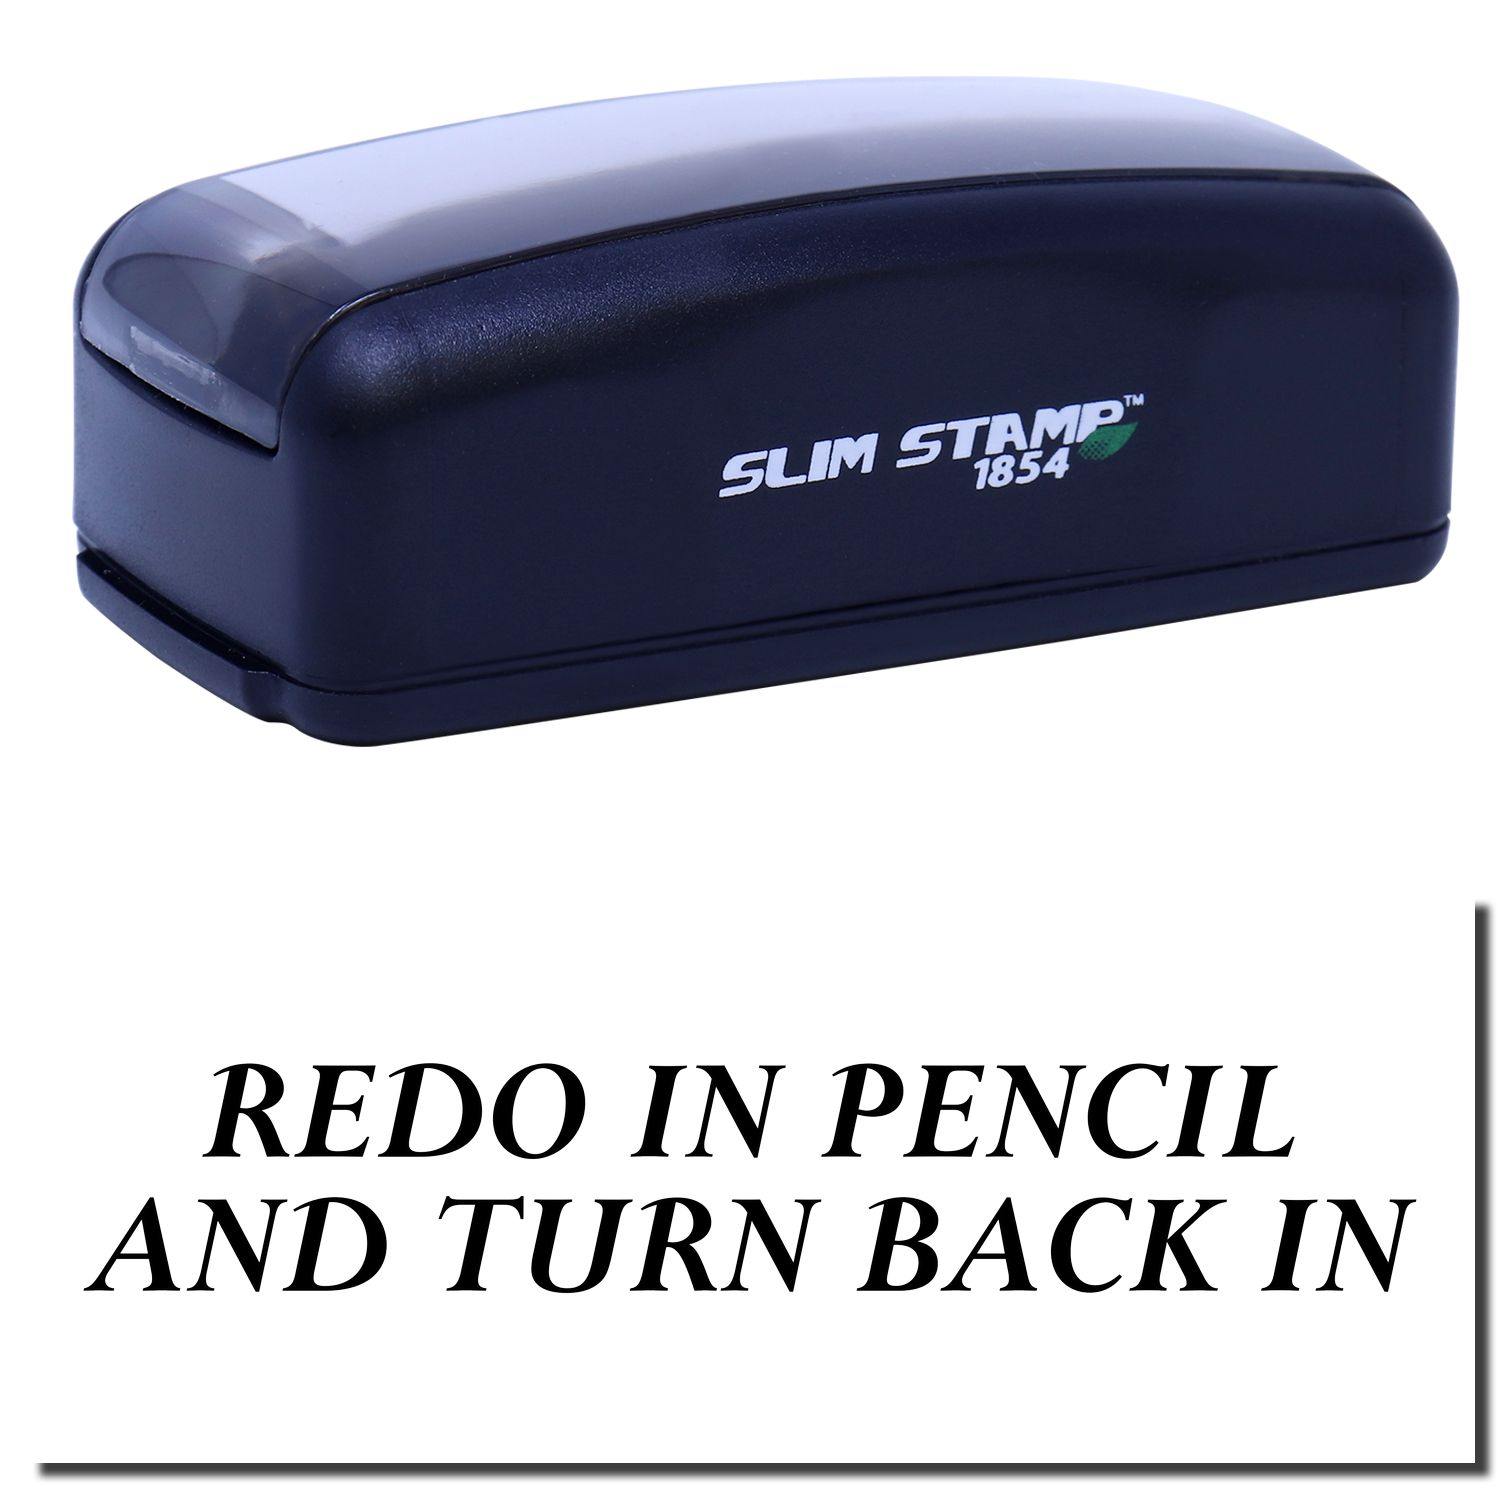 A stock office pre-inked stamp with a stamped image showing how the text "REDO IN PENCIL AND TURN BACK IN" in a large font is displayed after stamping.